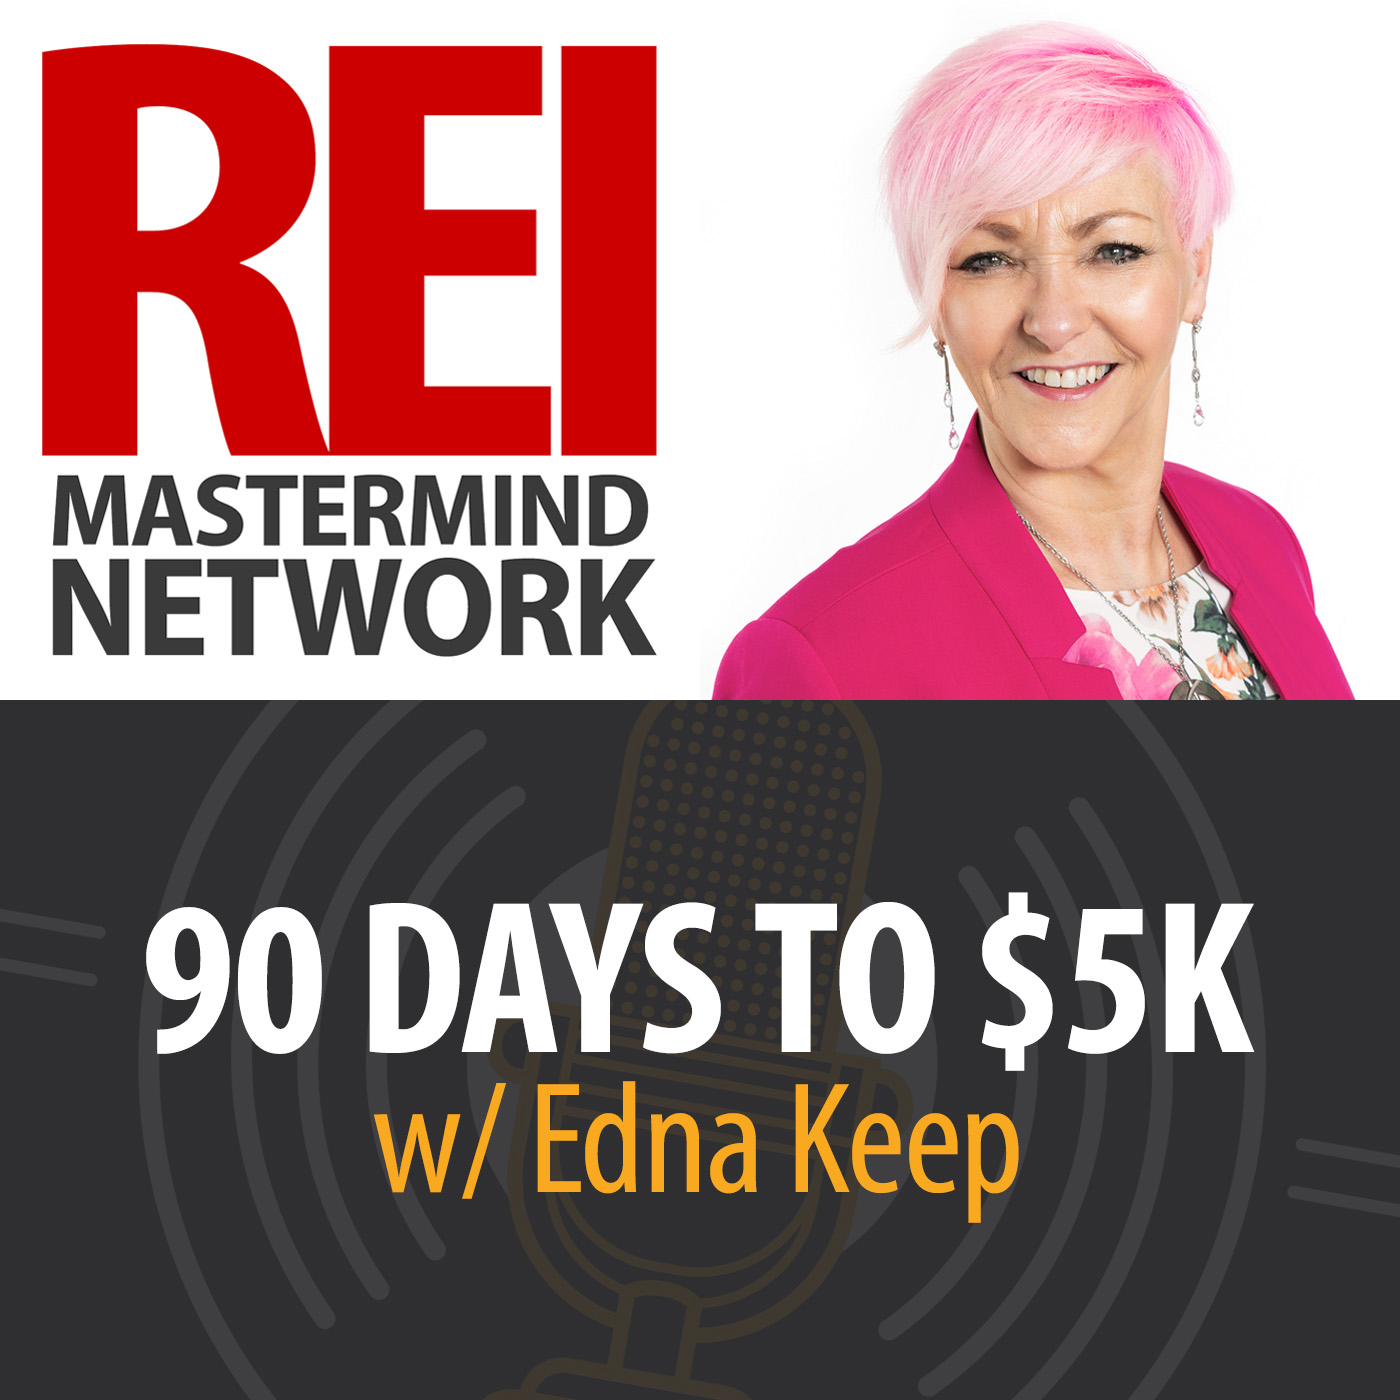 90 Days to $5k with Edna Keep Image